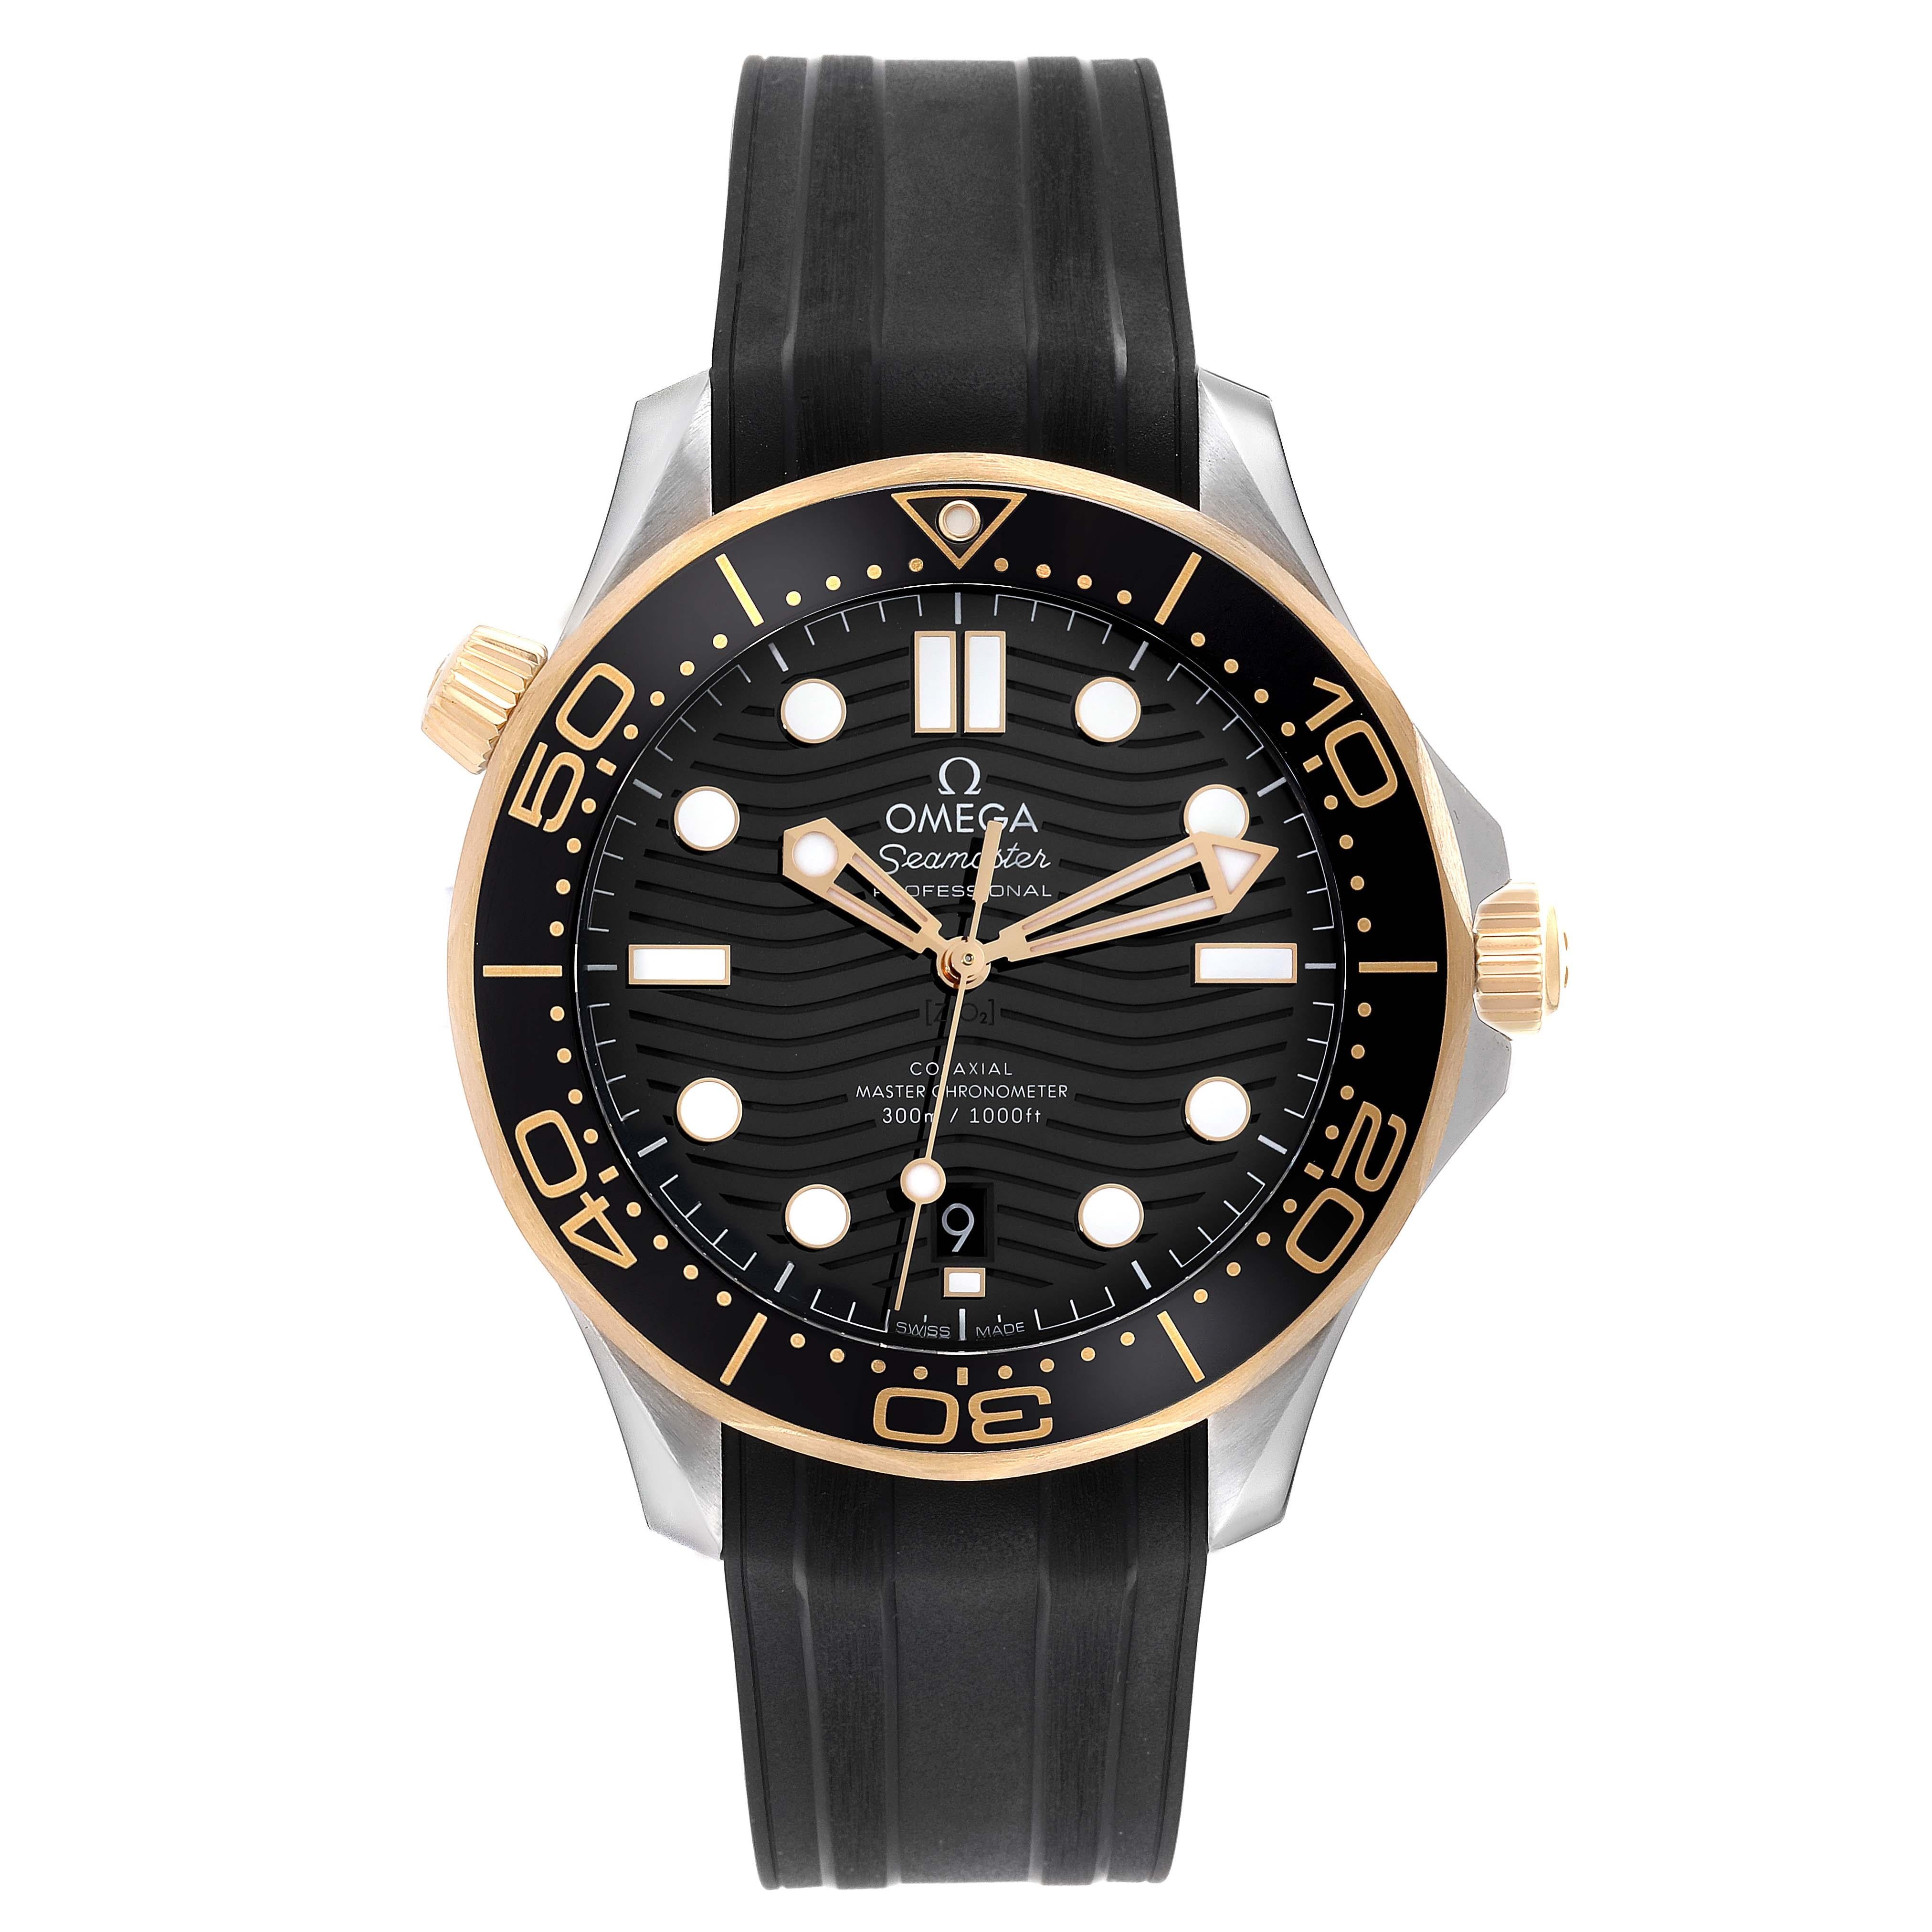 Omega Seamaster Diver Steel Yellow Gold Mens Watch 210.22.42.20.01.001 Card. Automatic self-winding chronometer, Co-Axial Escapement movement. Certified Master Chronometer, approved by METAS, resistant to magnetic fields reaching 15,000 gauss. Free